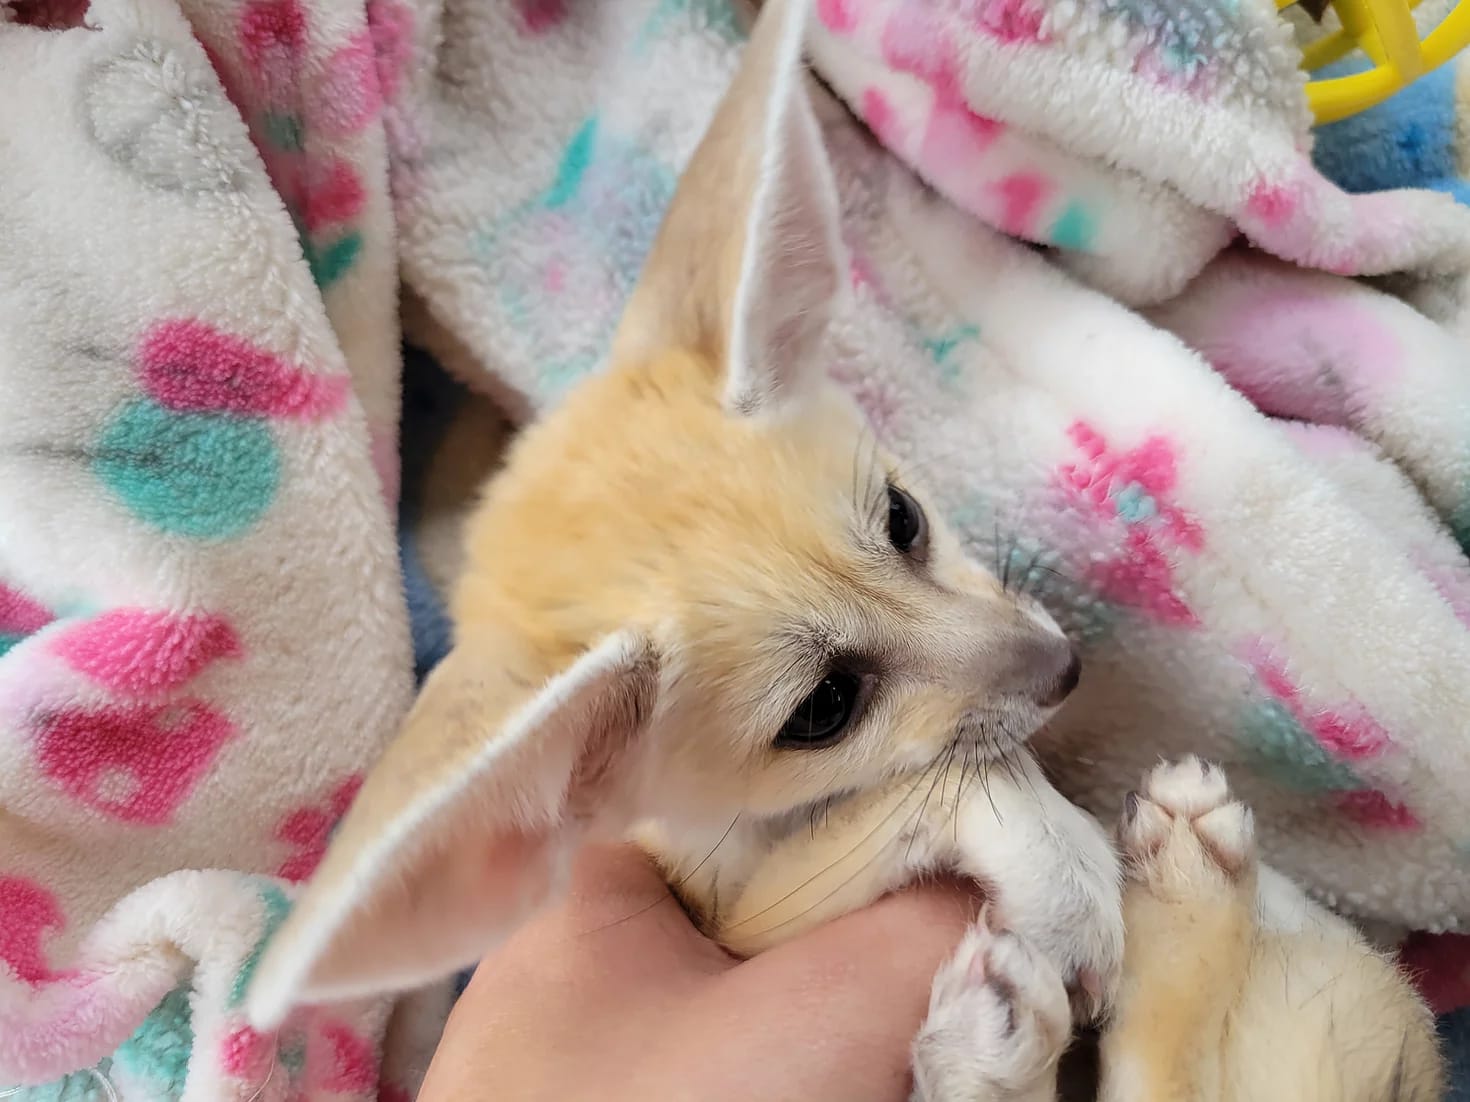 fennec fox for sale